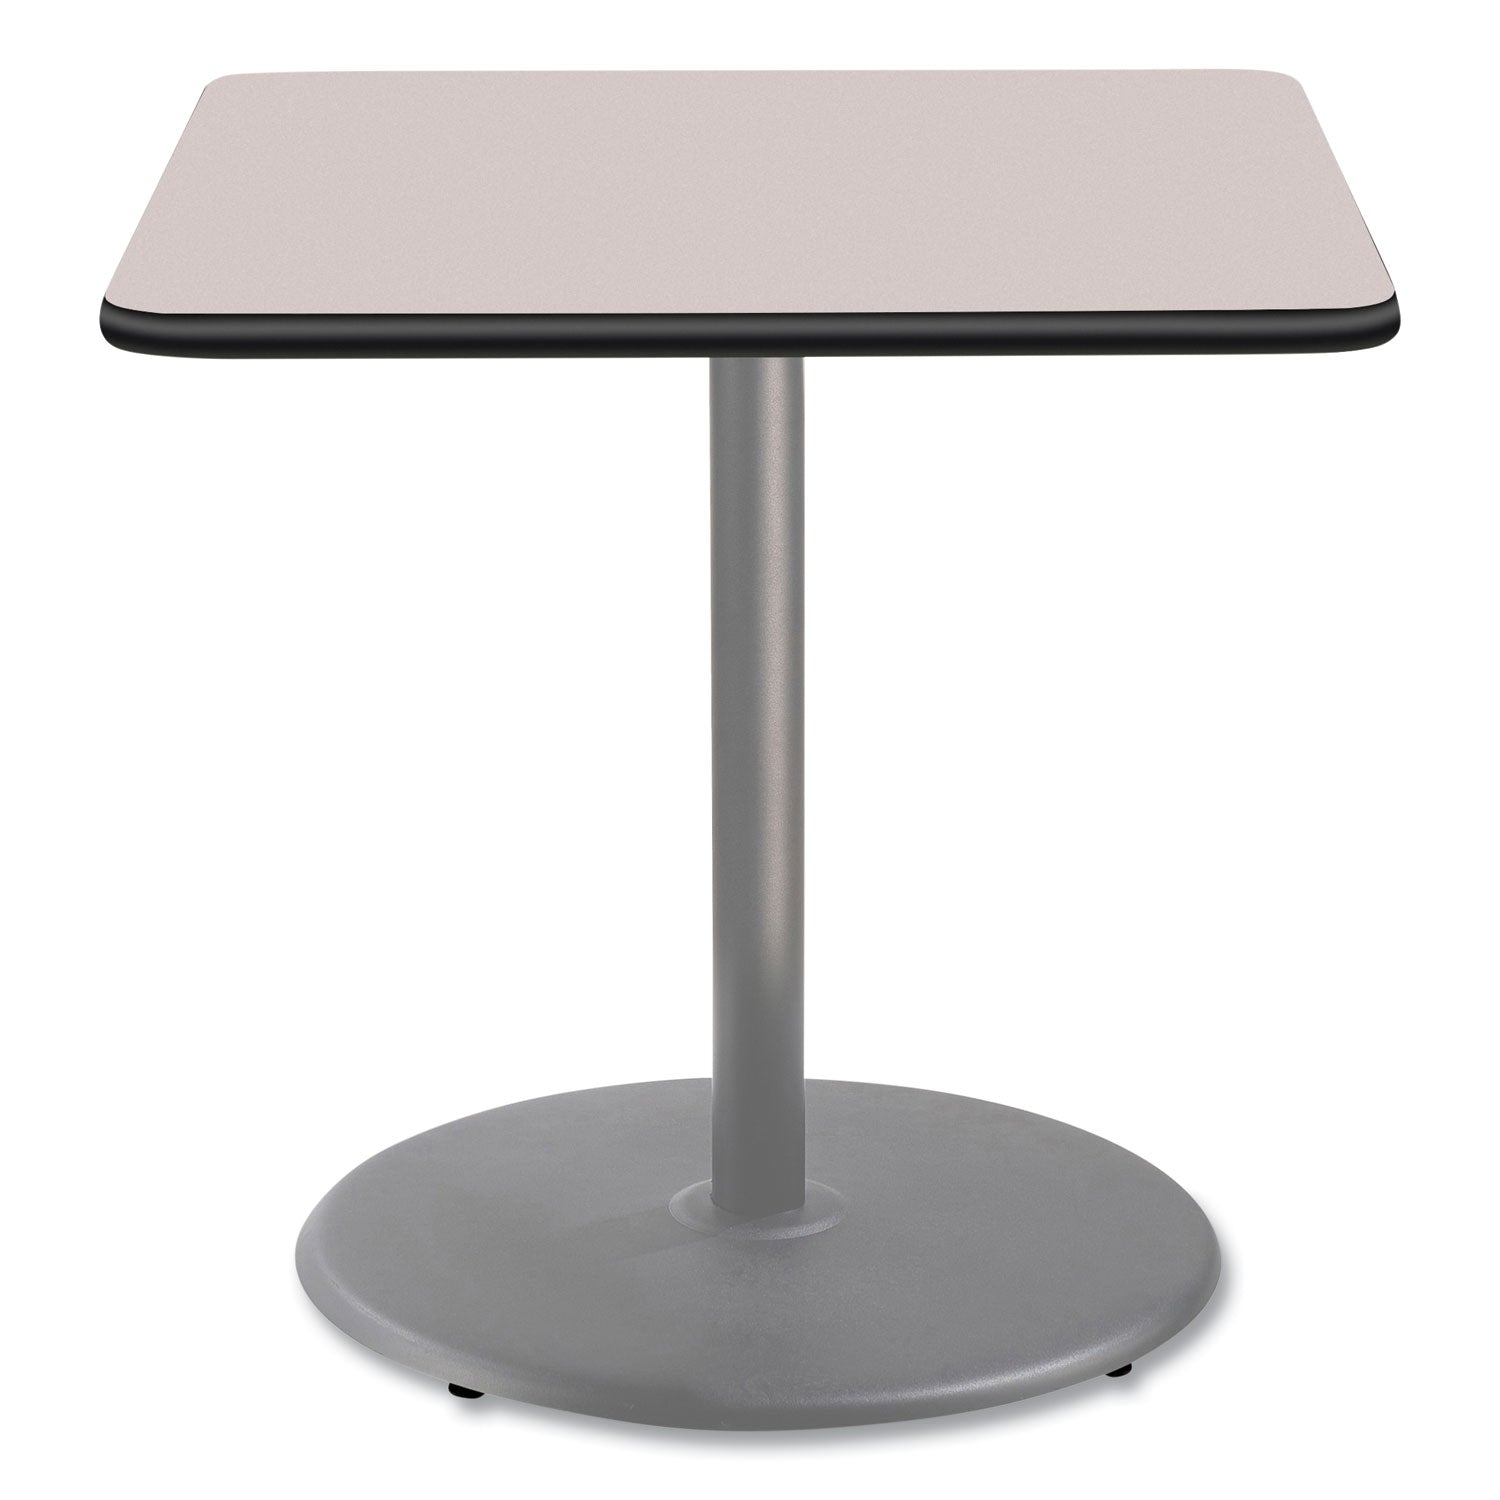 cafe-table-36w-x-36d-x-36h-square-top-round-base-gray-nebula-top-gray-base-ships-in-7-10-business-days_npscg33636rc1gy - 2